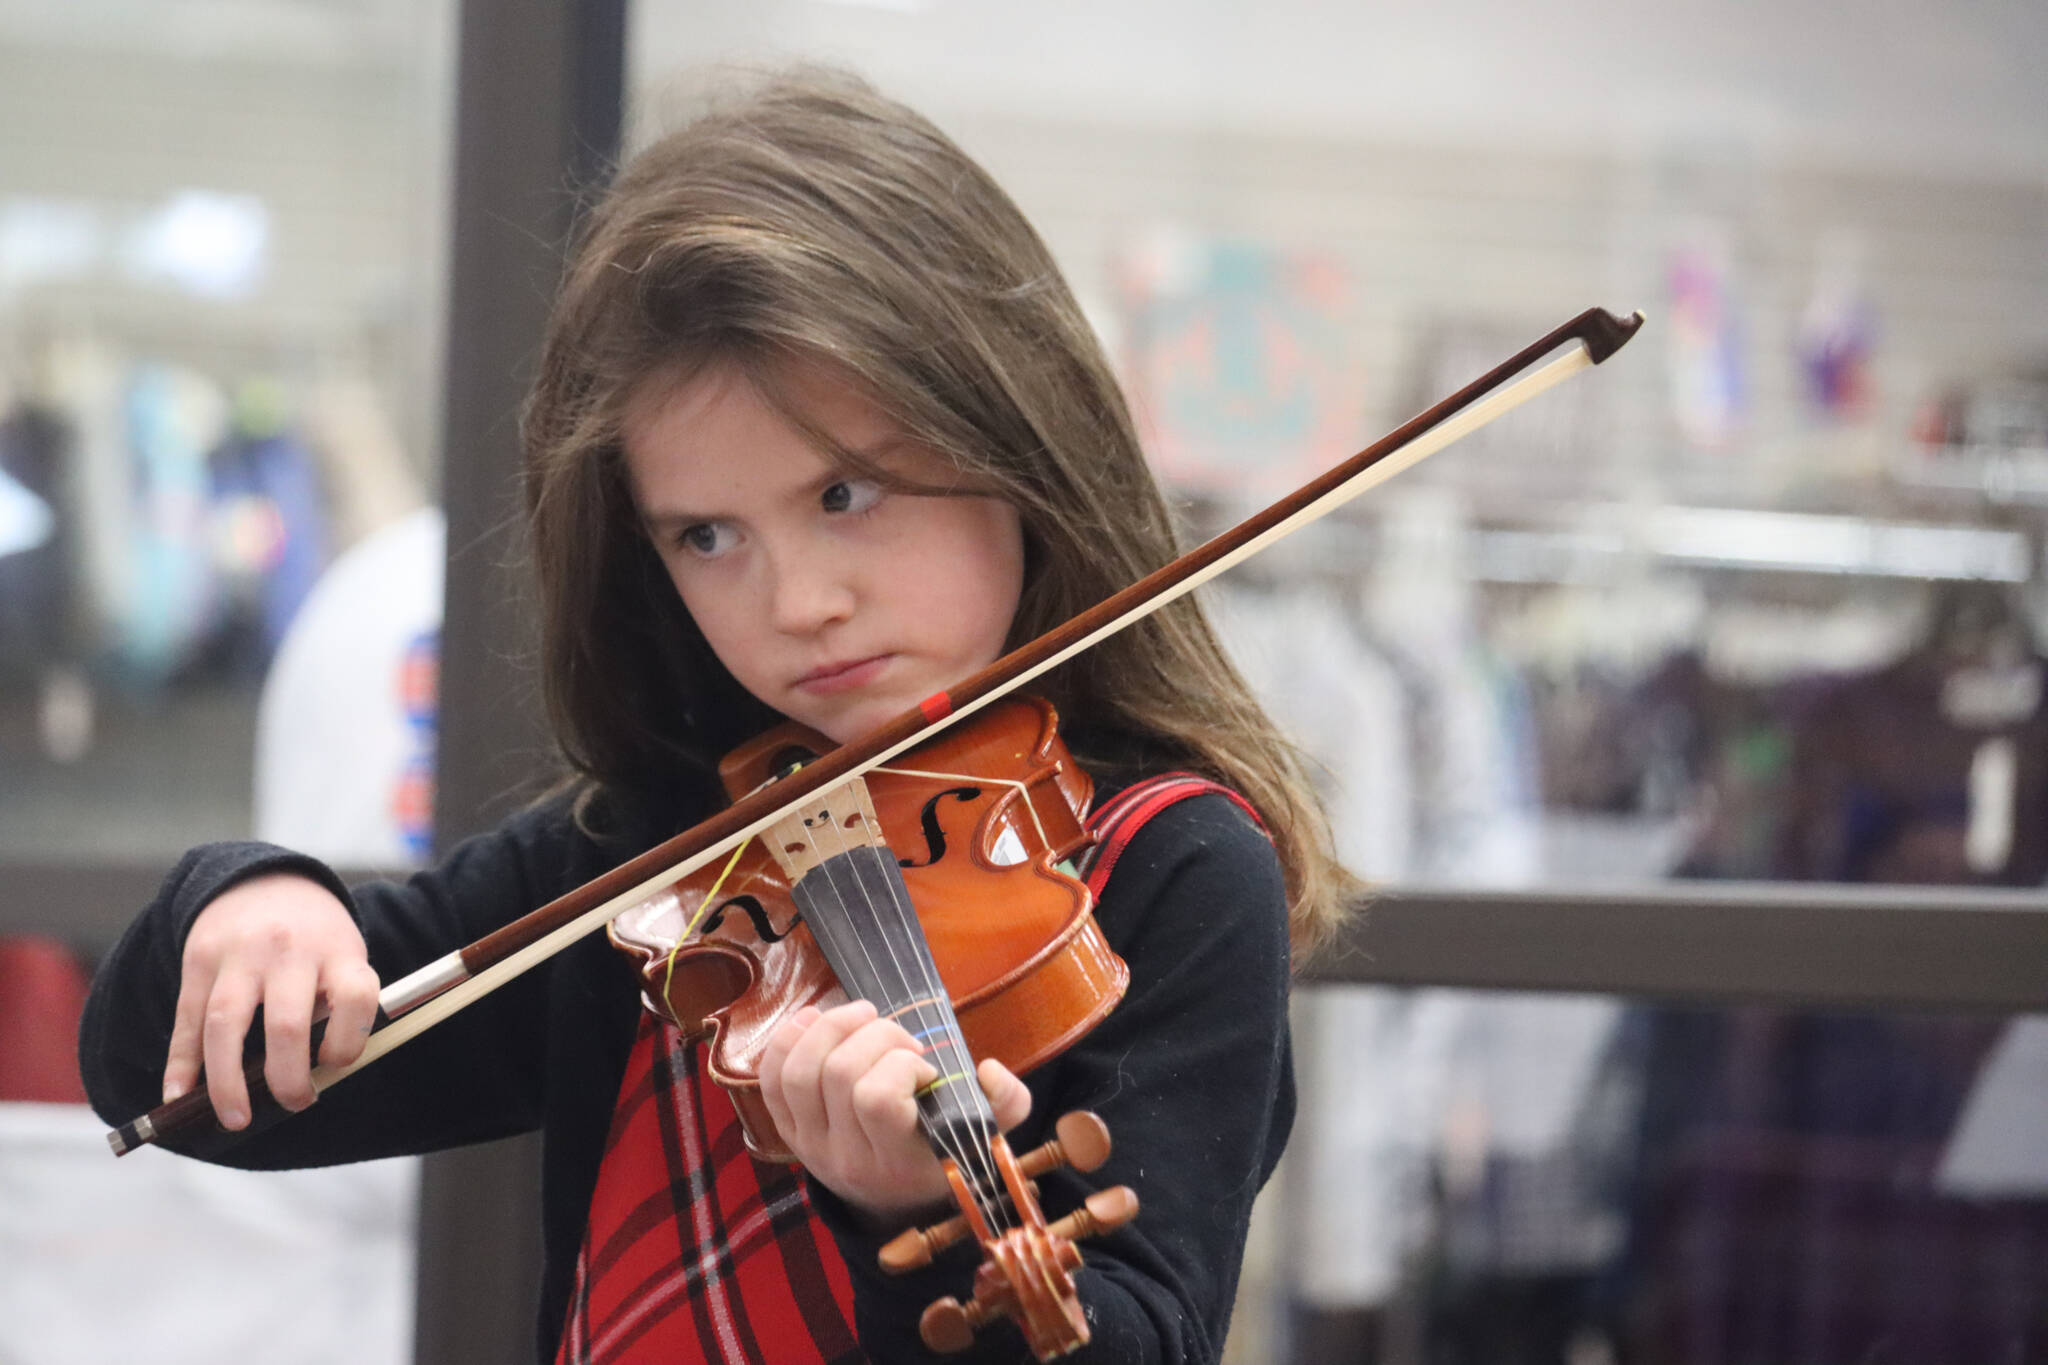 B. Thomas of the beginner level violins with Juneau Alaska Music Matters plays for a full crowd at the Mendenhall Mall during the annual Juneau Holiday Village on Saturday. (Jonson Kuhn / Juneau Empire)